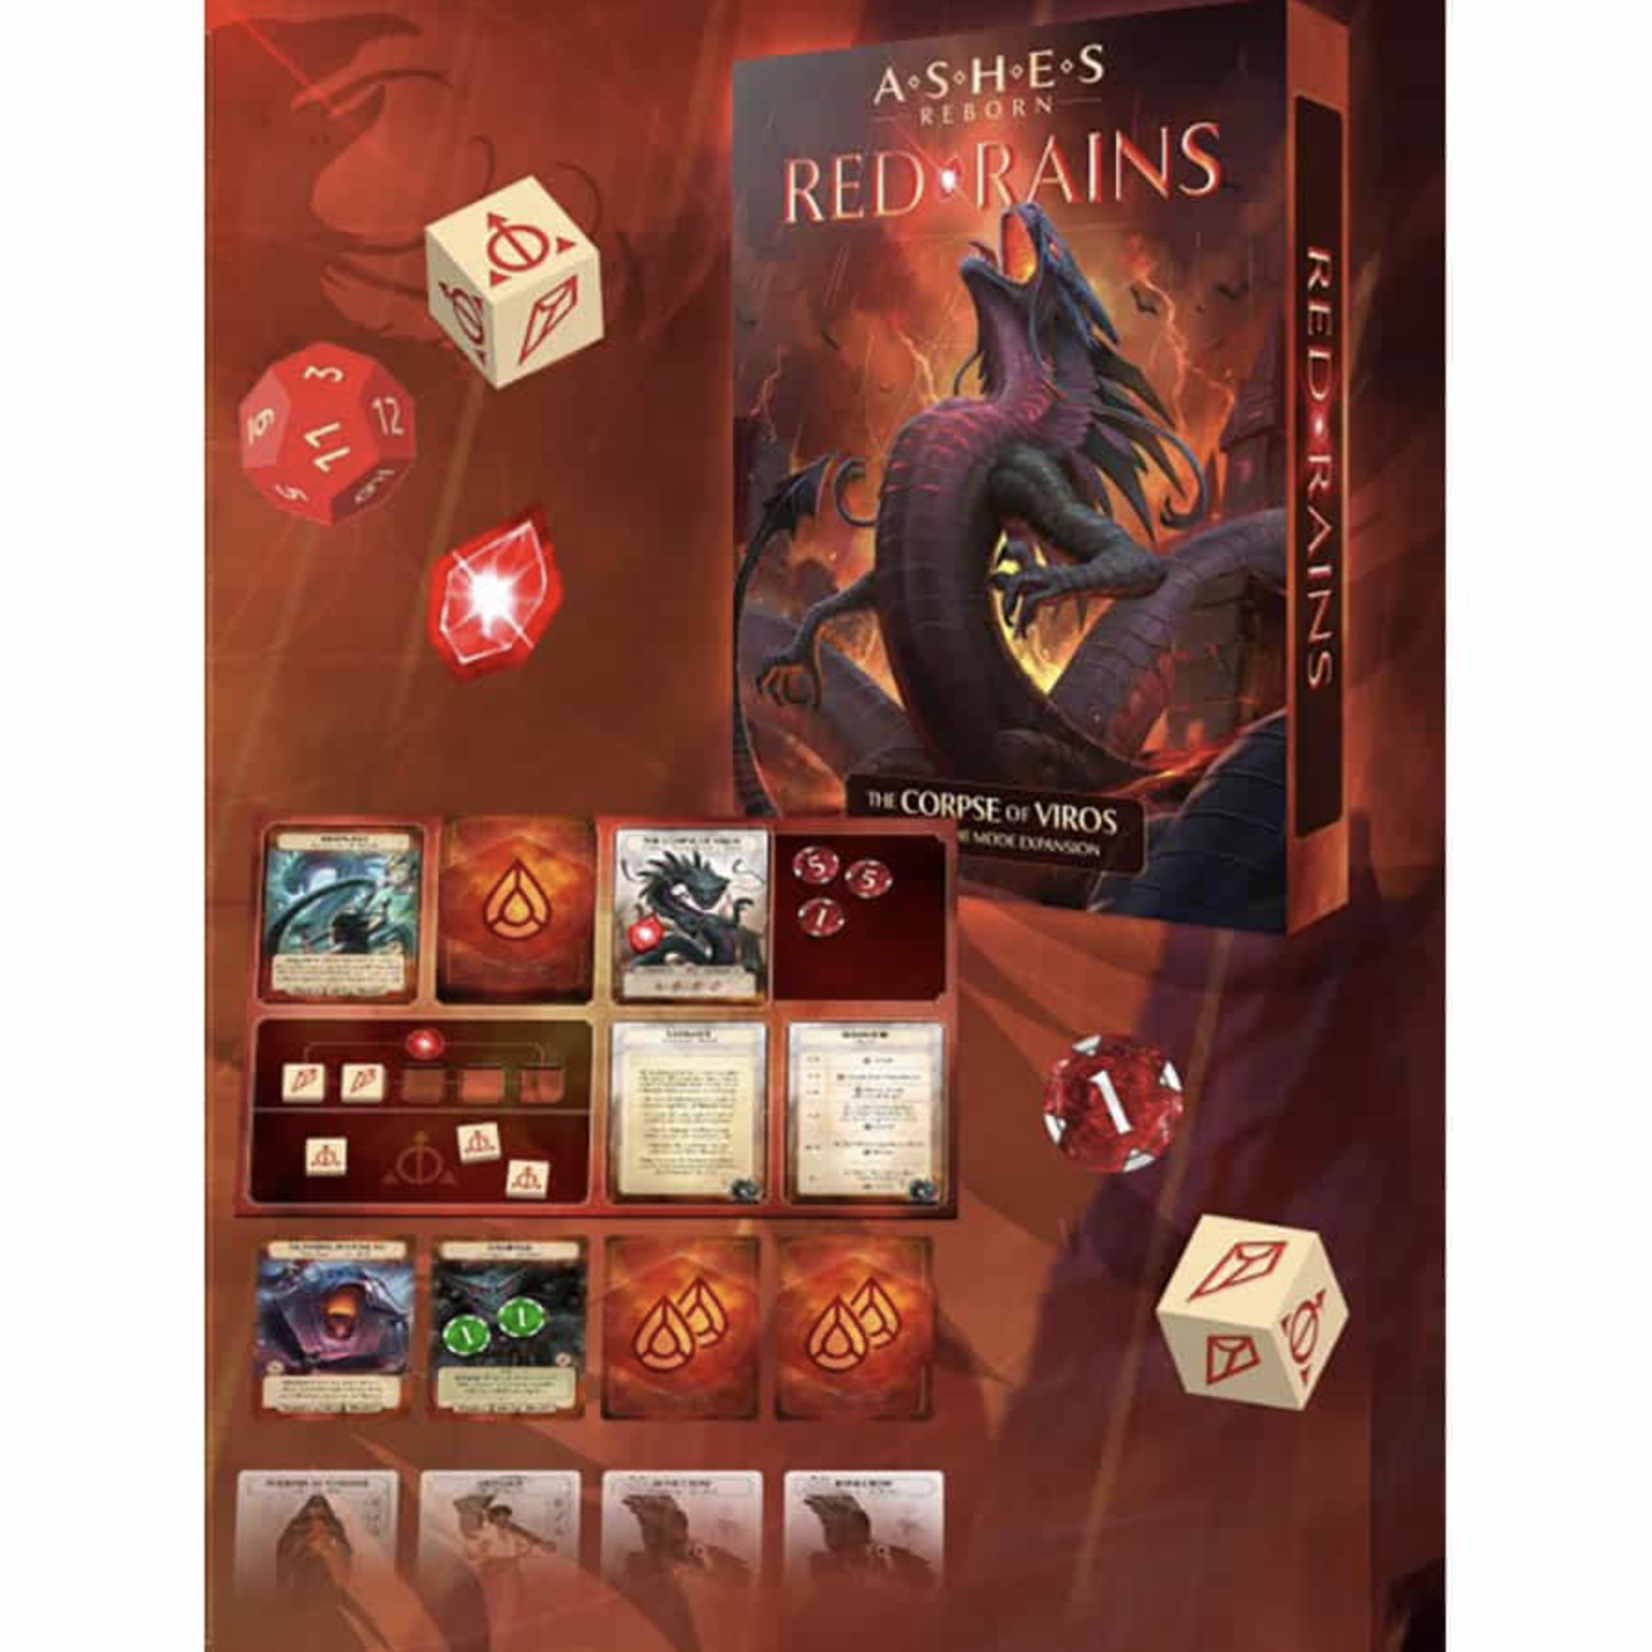 Plaid Hat Games Ashes Reborn - Red Rains: Corpse of Viros Deluxe Expansion Set